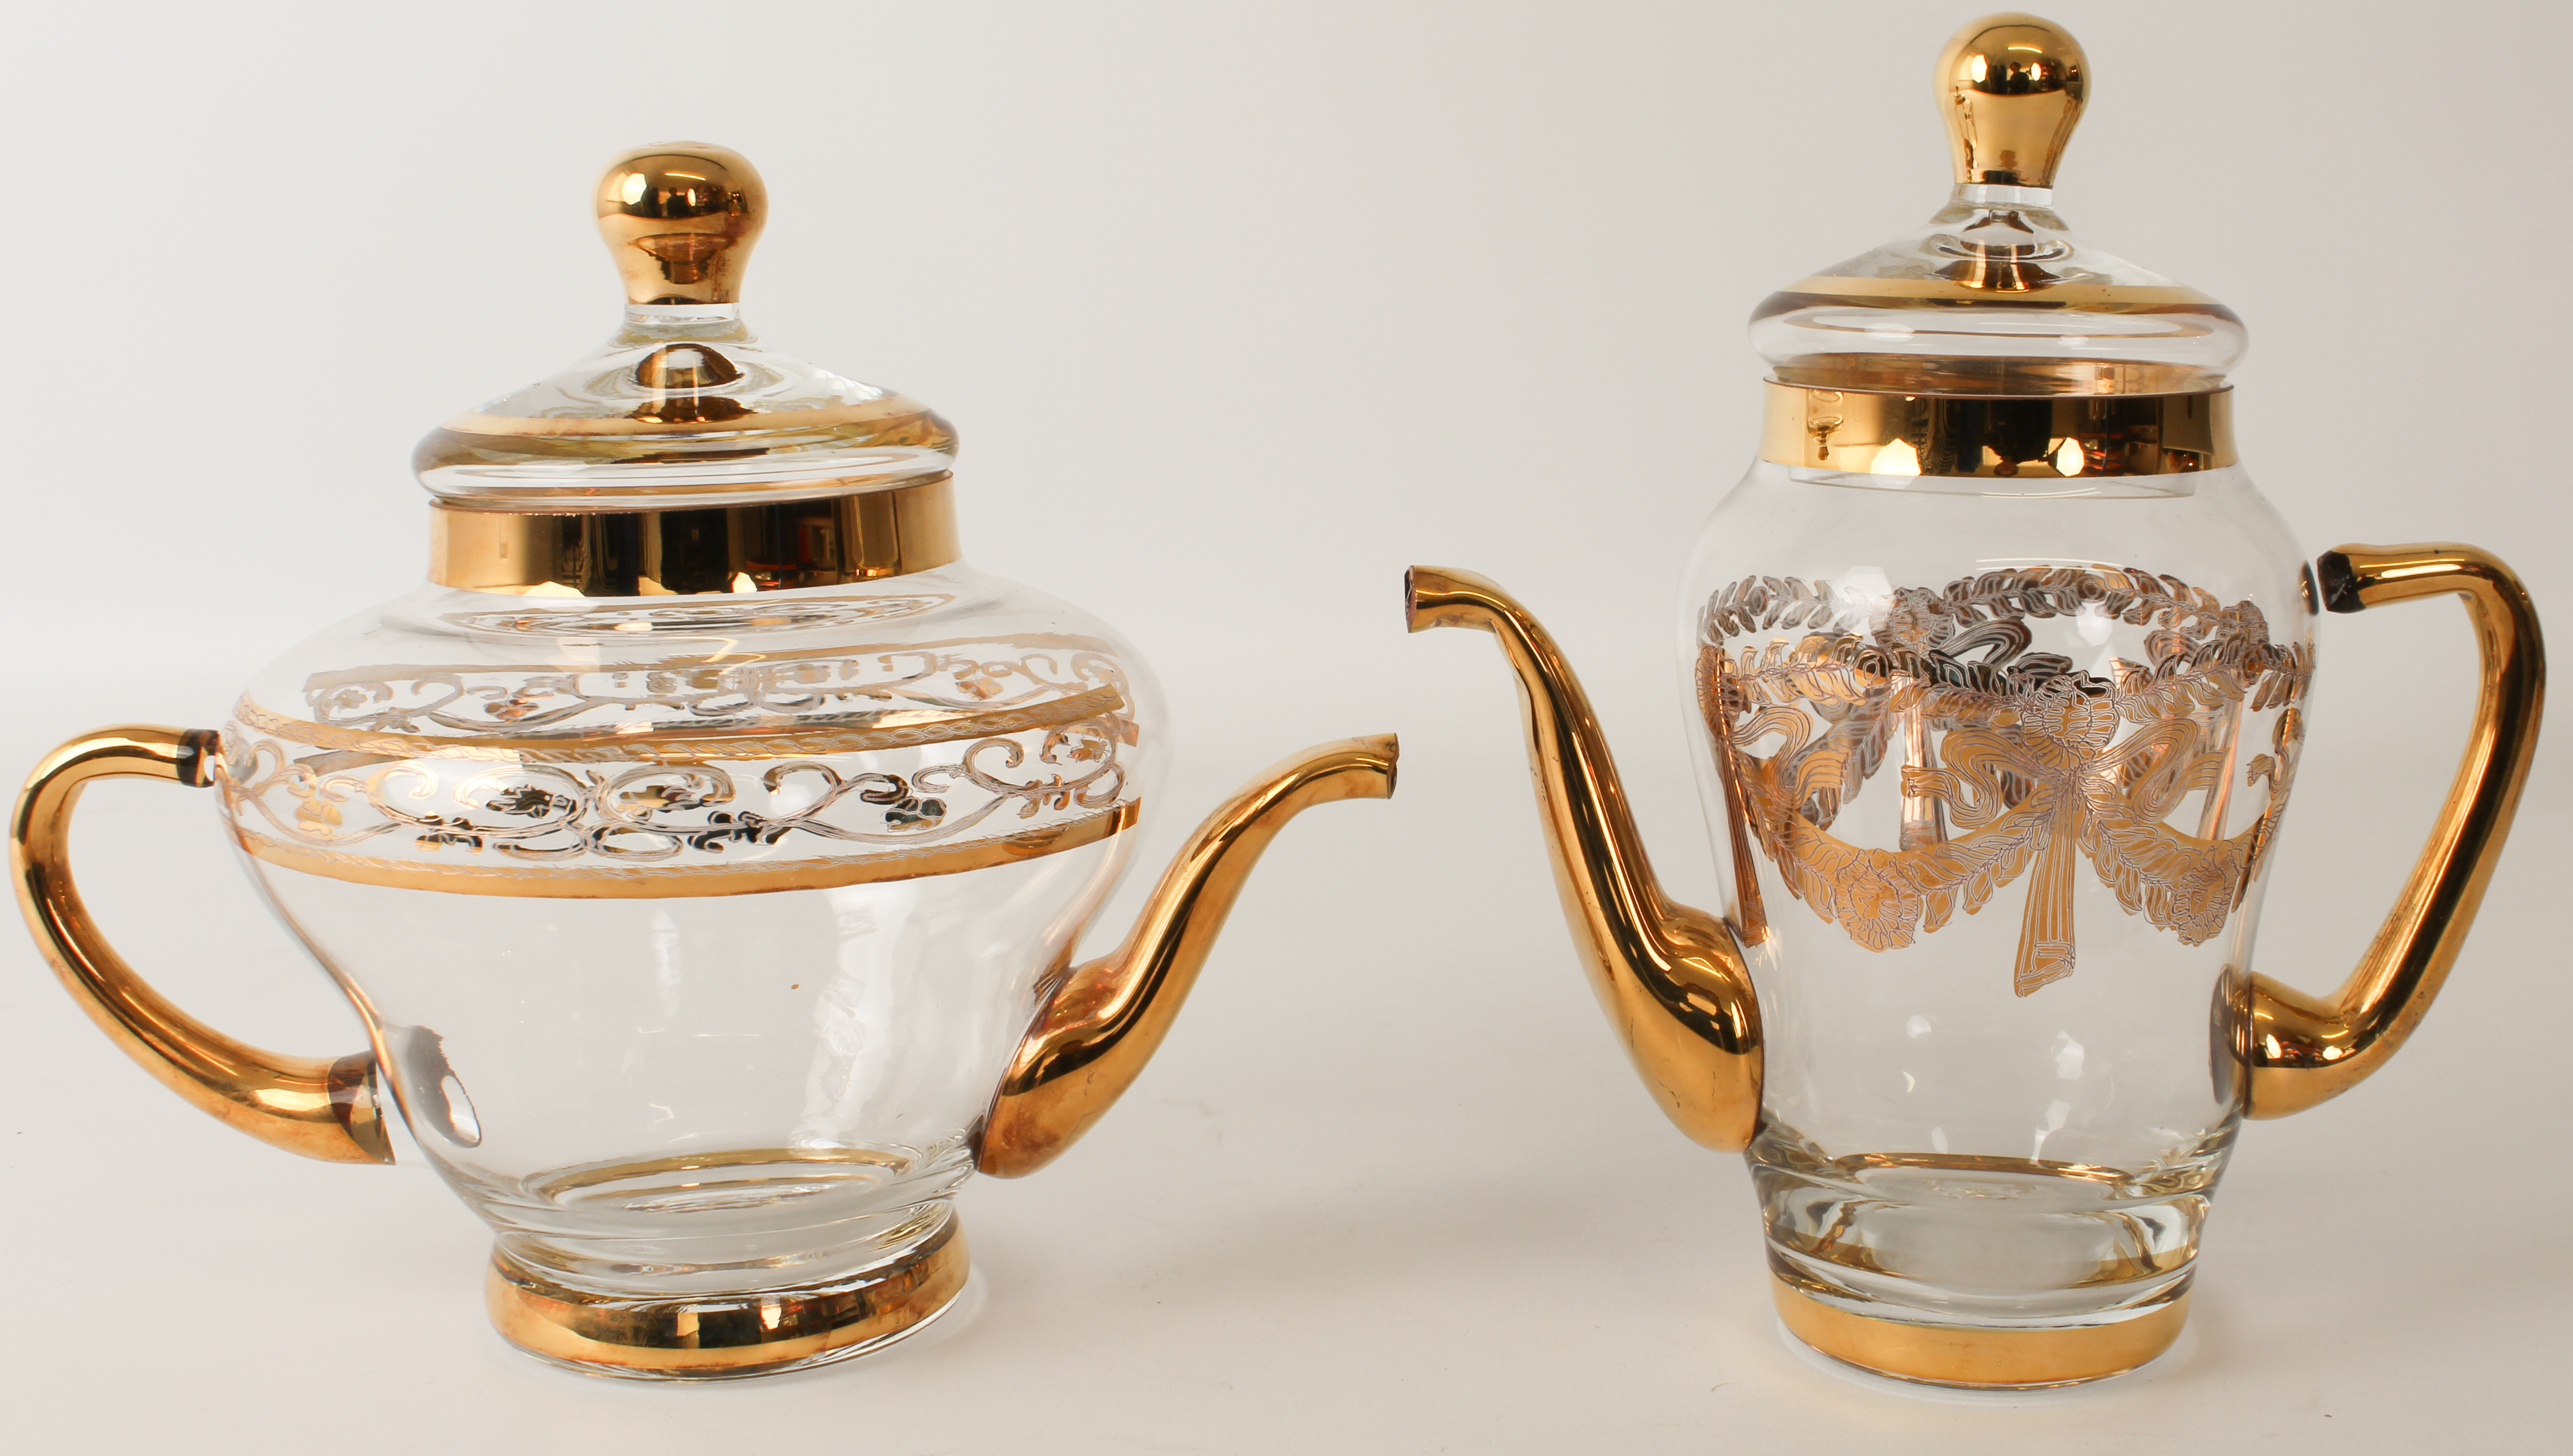 An Italian gilt-decorated glass tea and coffee service in the Florentine taste by Interglass and - Image 3 of 5